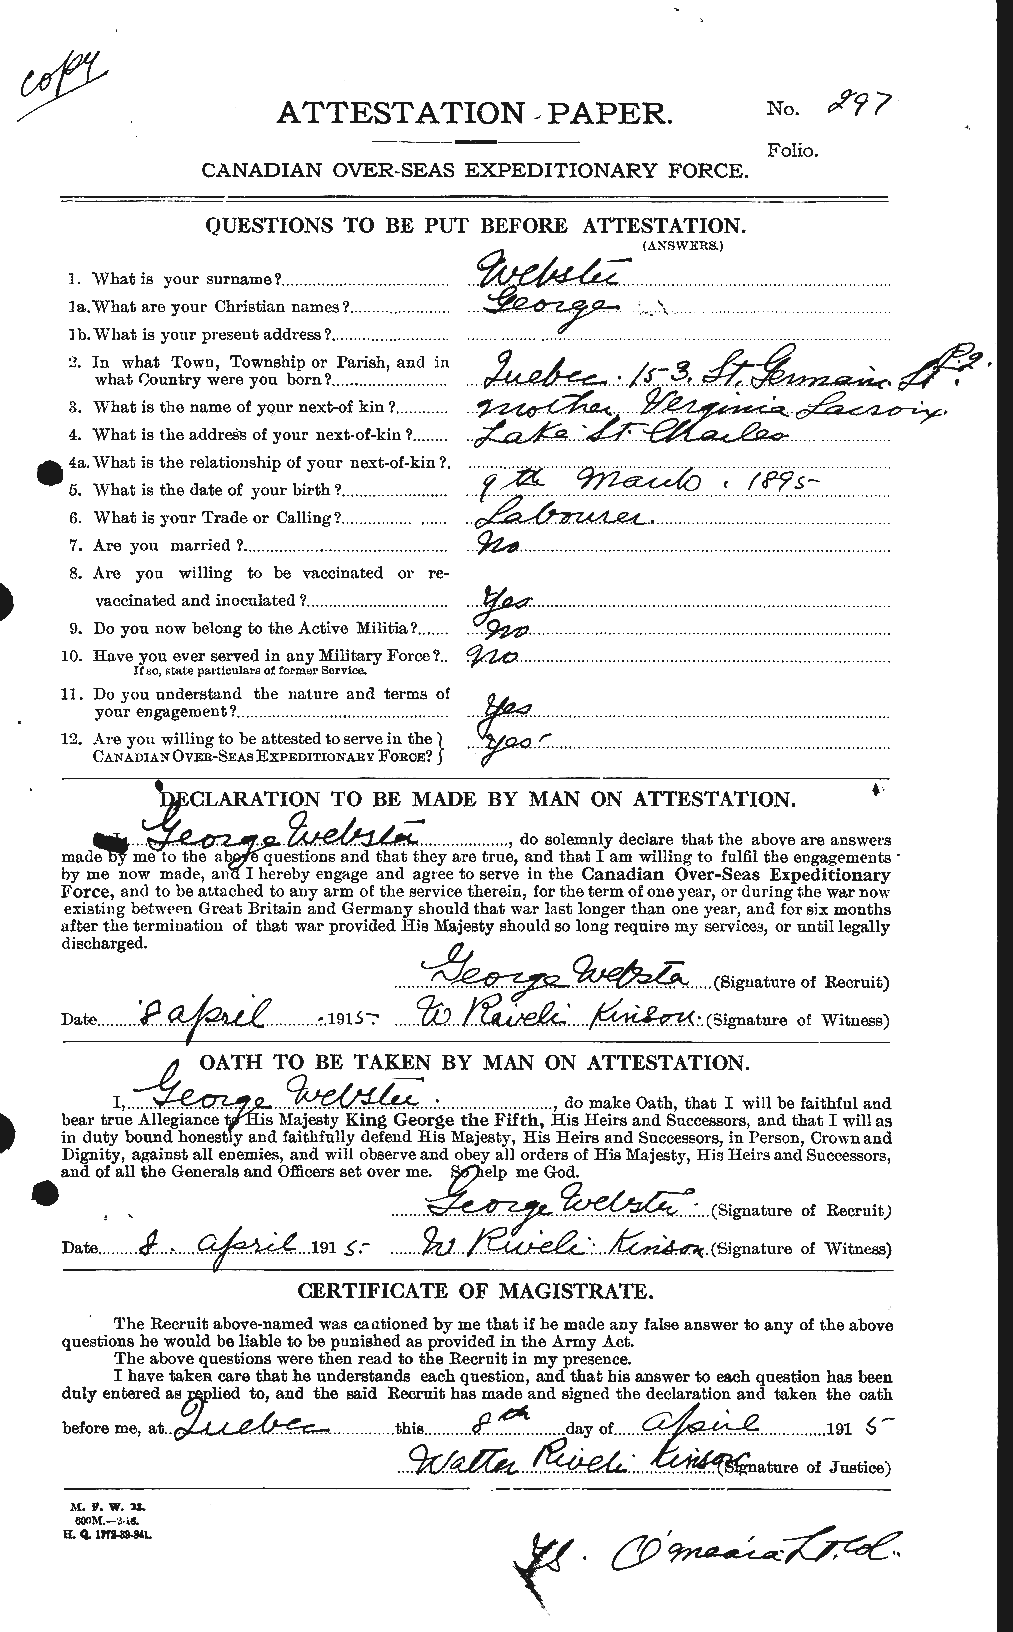 Personnel Records of the First World War - CEF 670375a